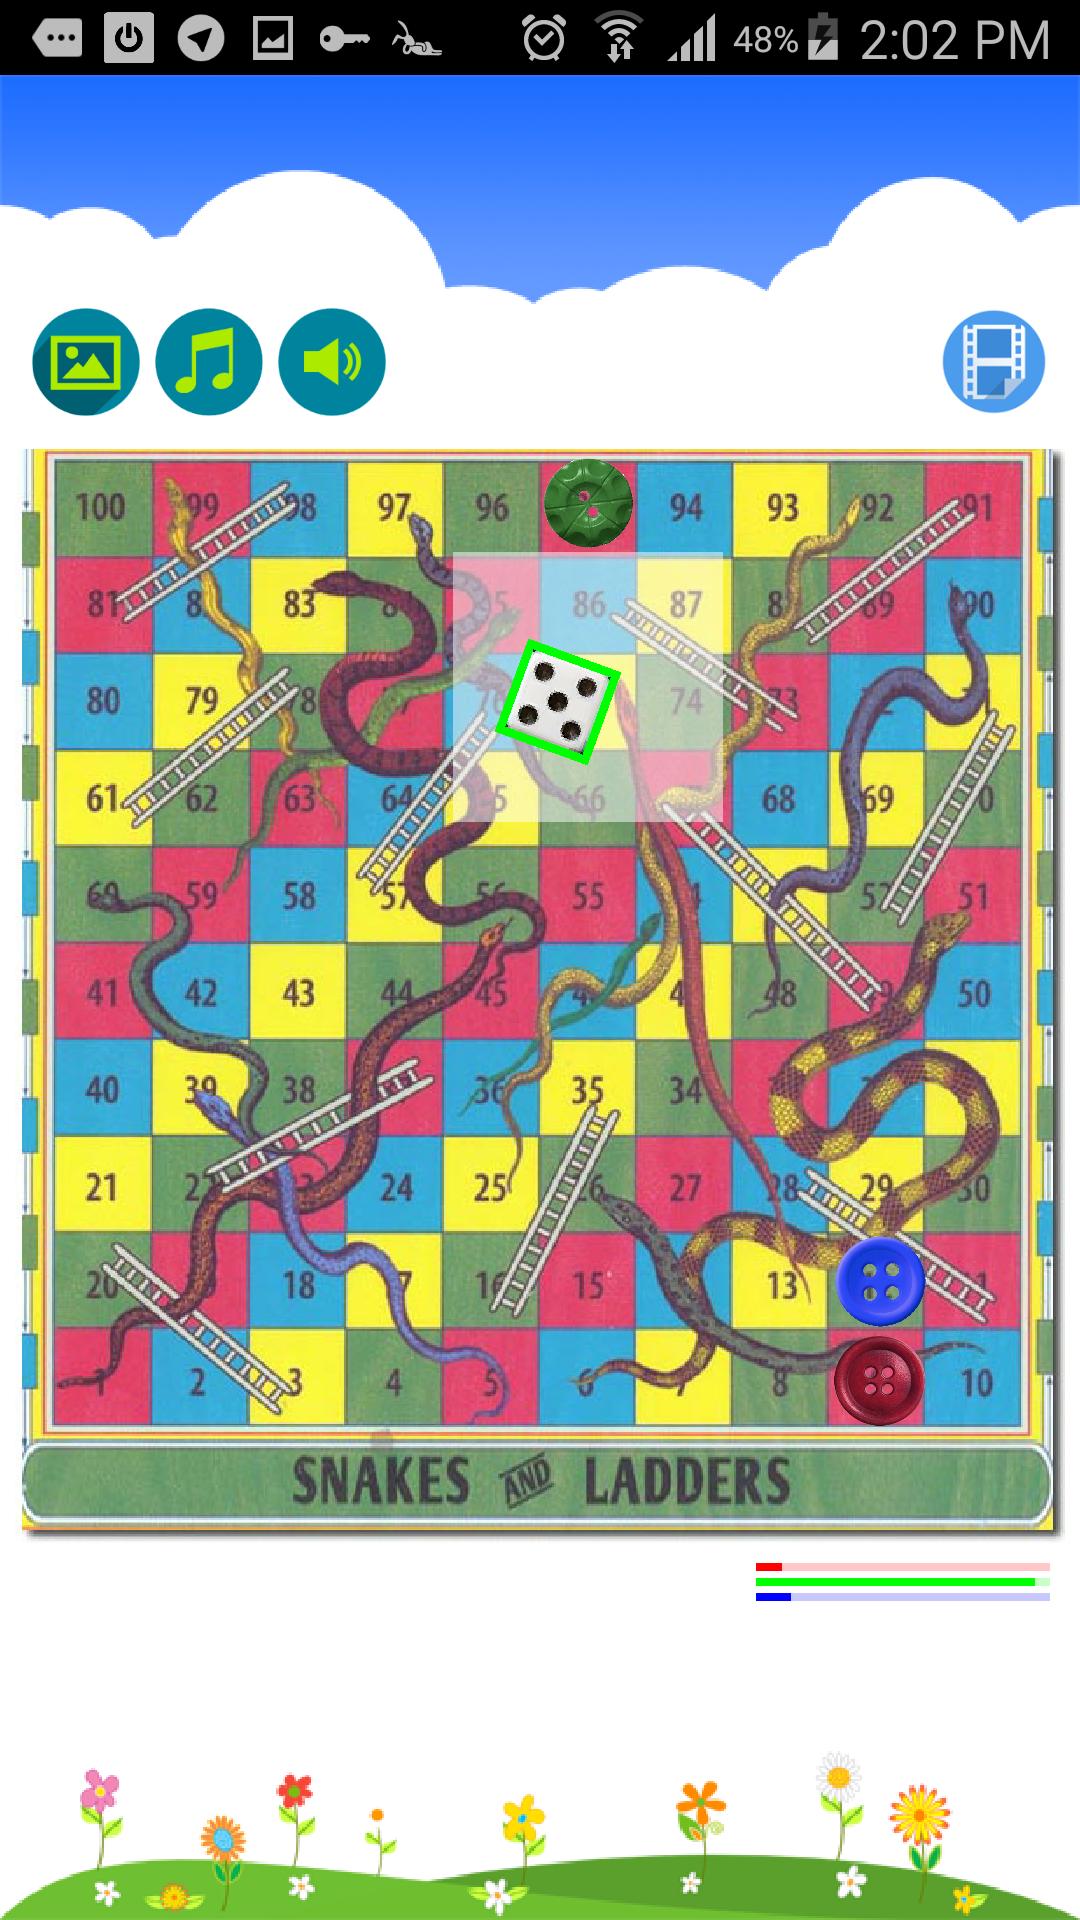 Snakes and Ladders 3.1 Screenshot 4